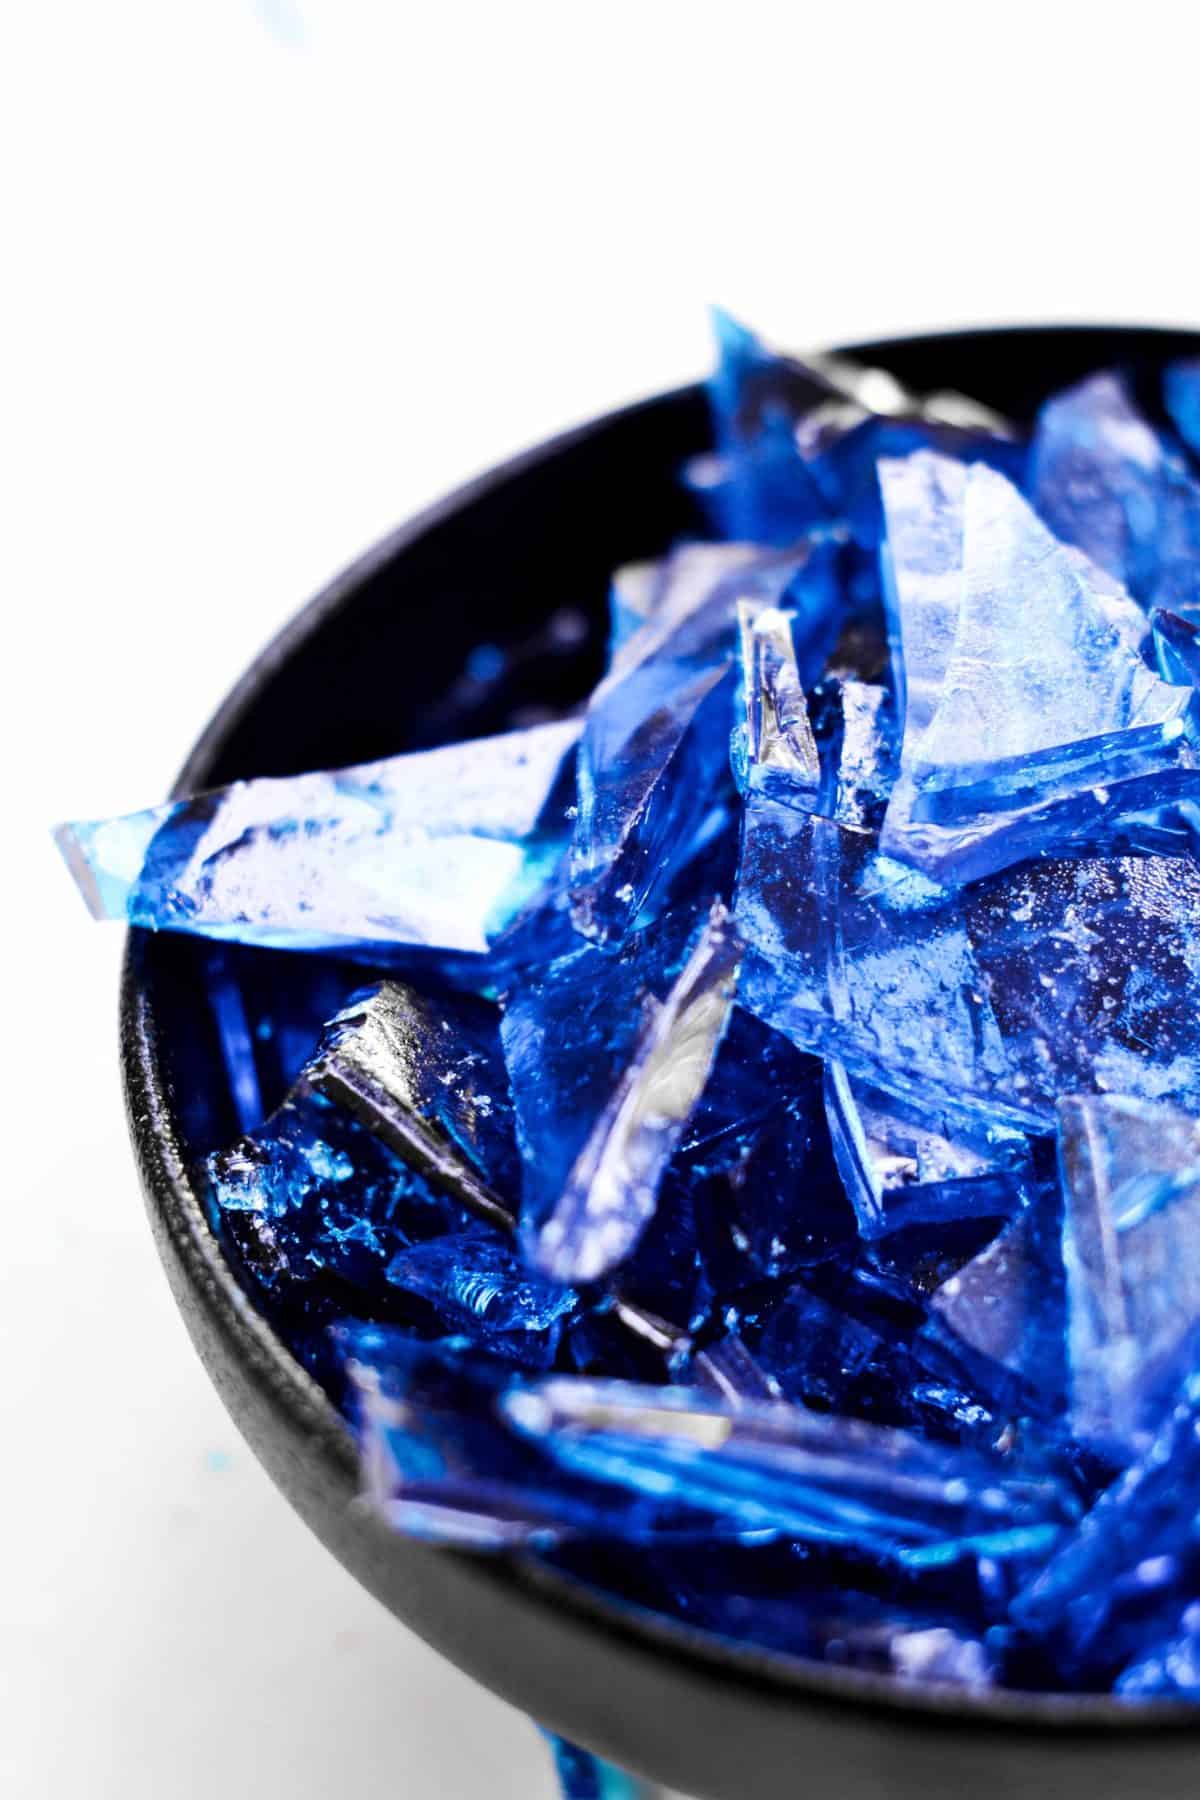 How to Make Rock Candy (Blue Rock Candy Recipe) - The Cookie Rookie®